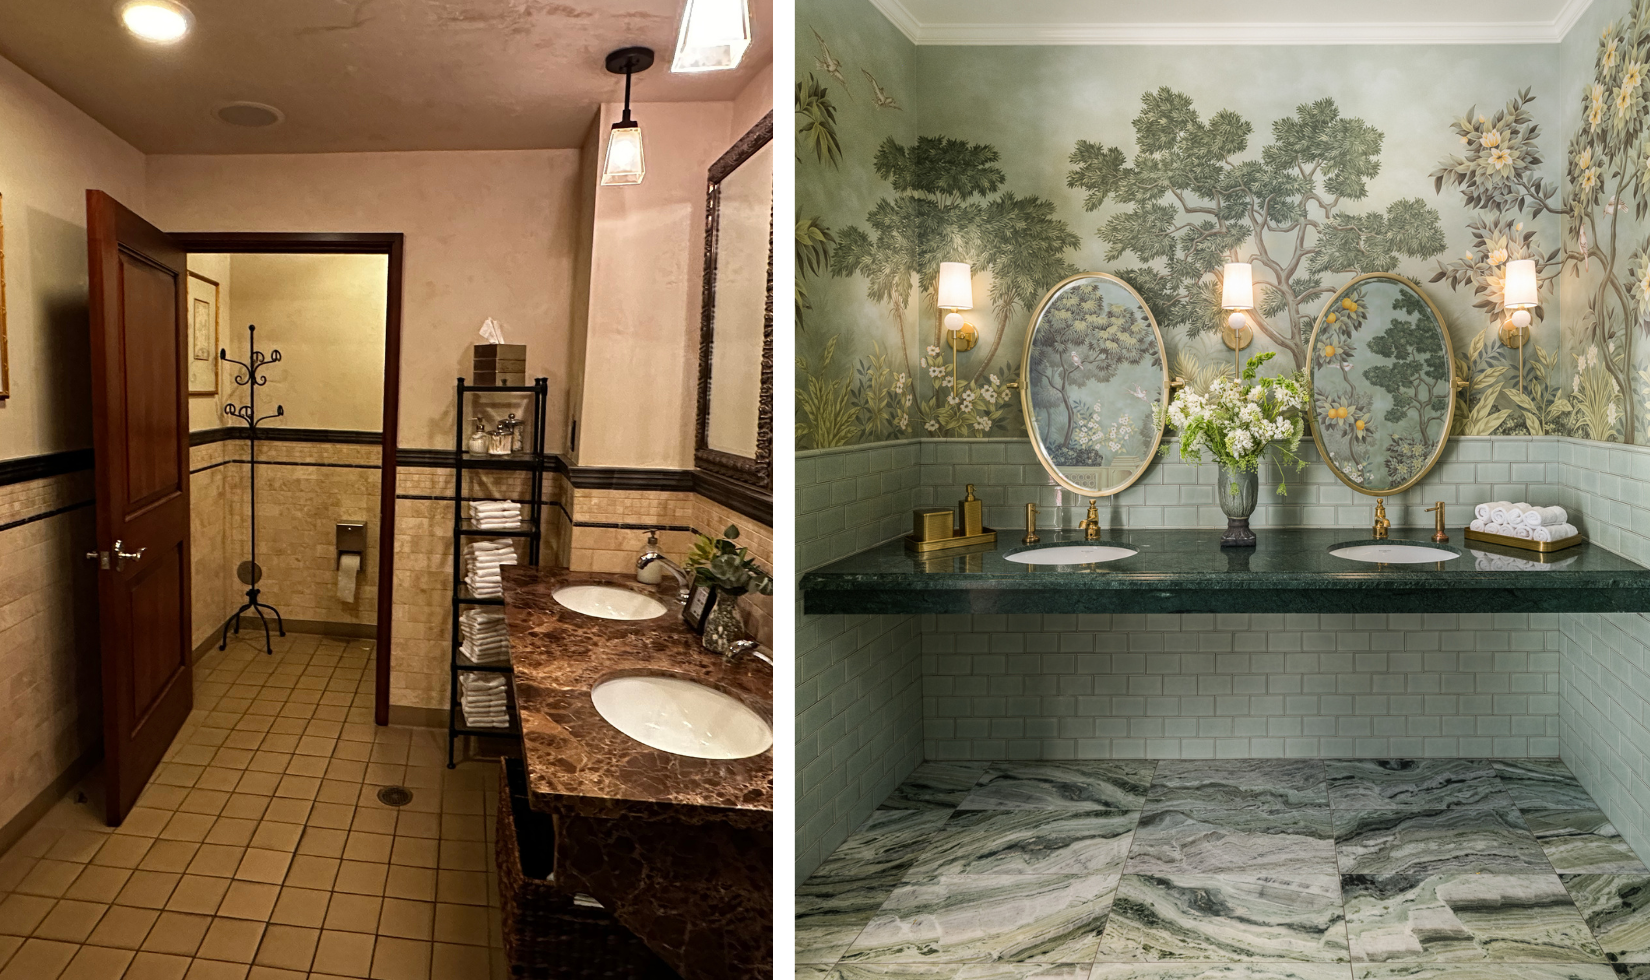 before and after photos of women's bathroom. left image has dark wood accents and tiled flooring and right photo has intricate green and blue wallpaper with two gold mirrors